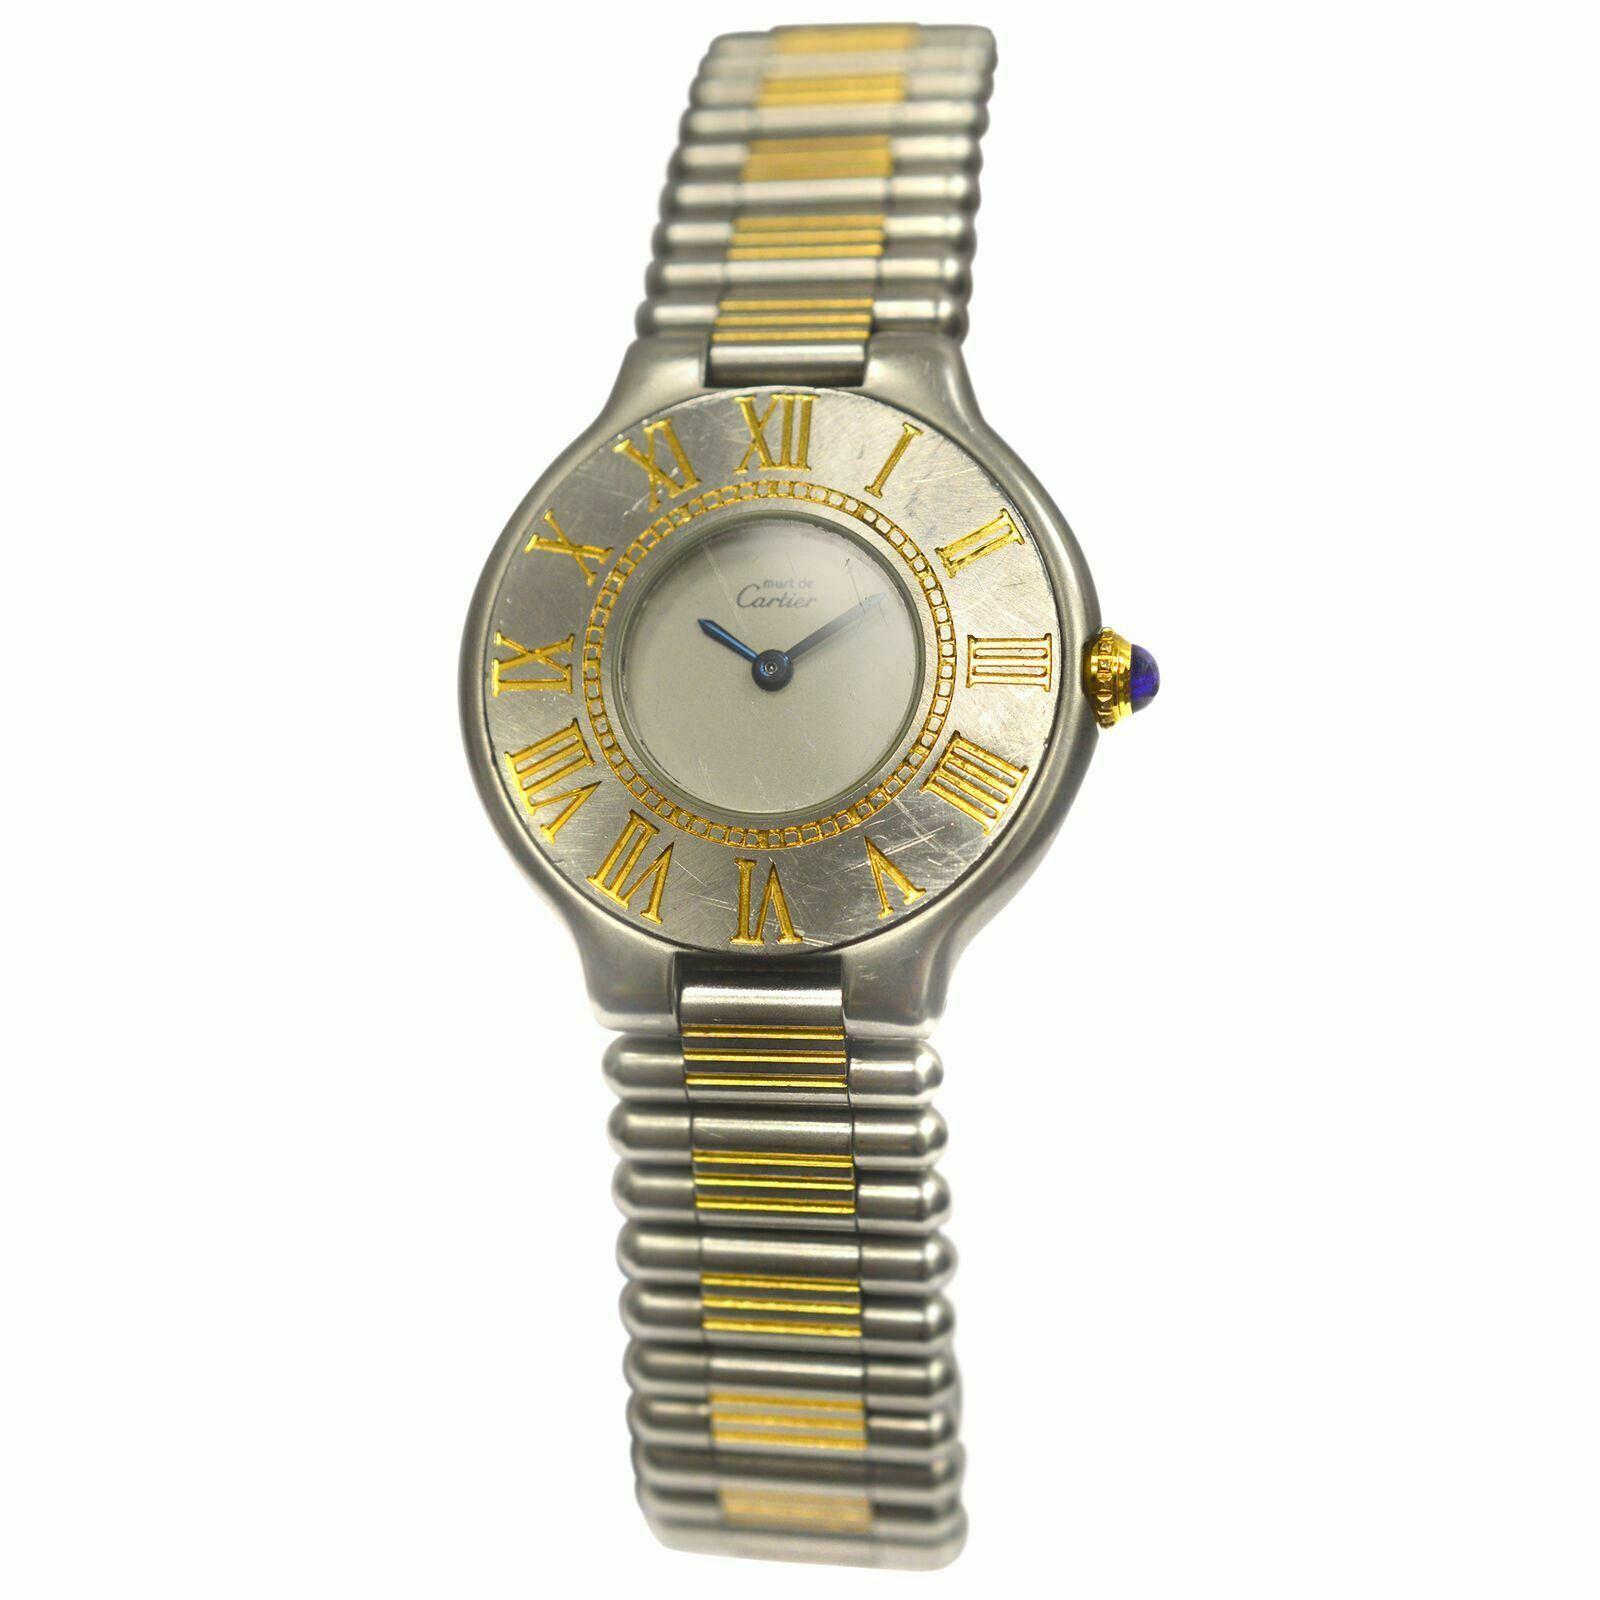 Brand	Cartier
Model	Must de Cartier
Gender	Ladies
Condition	Pre-owned
Movement	Swiss Quartz
Case Material	Stainless Steel & 18K Yellow Gold
Bracelet / Strap Material	
Stainless Steel & 18K Yellow Gold

Clasp / Buckle Material	
Stainless Steel